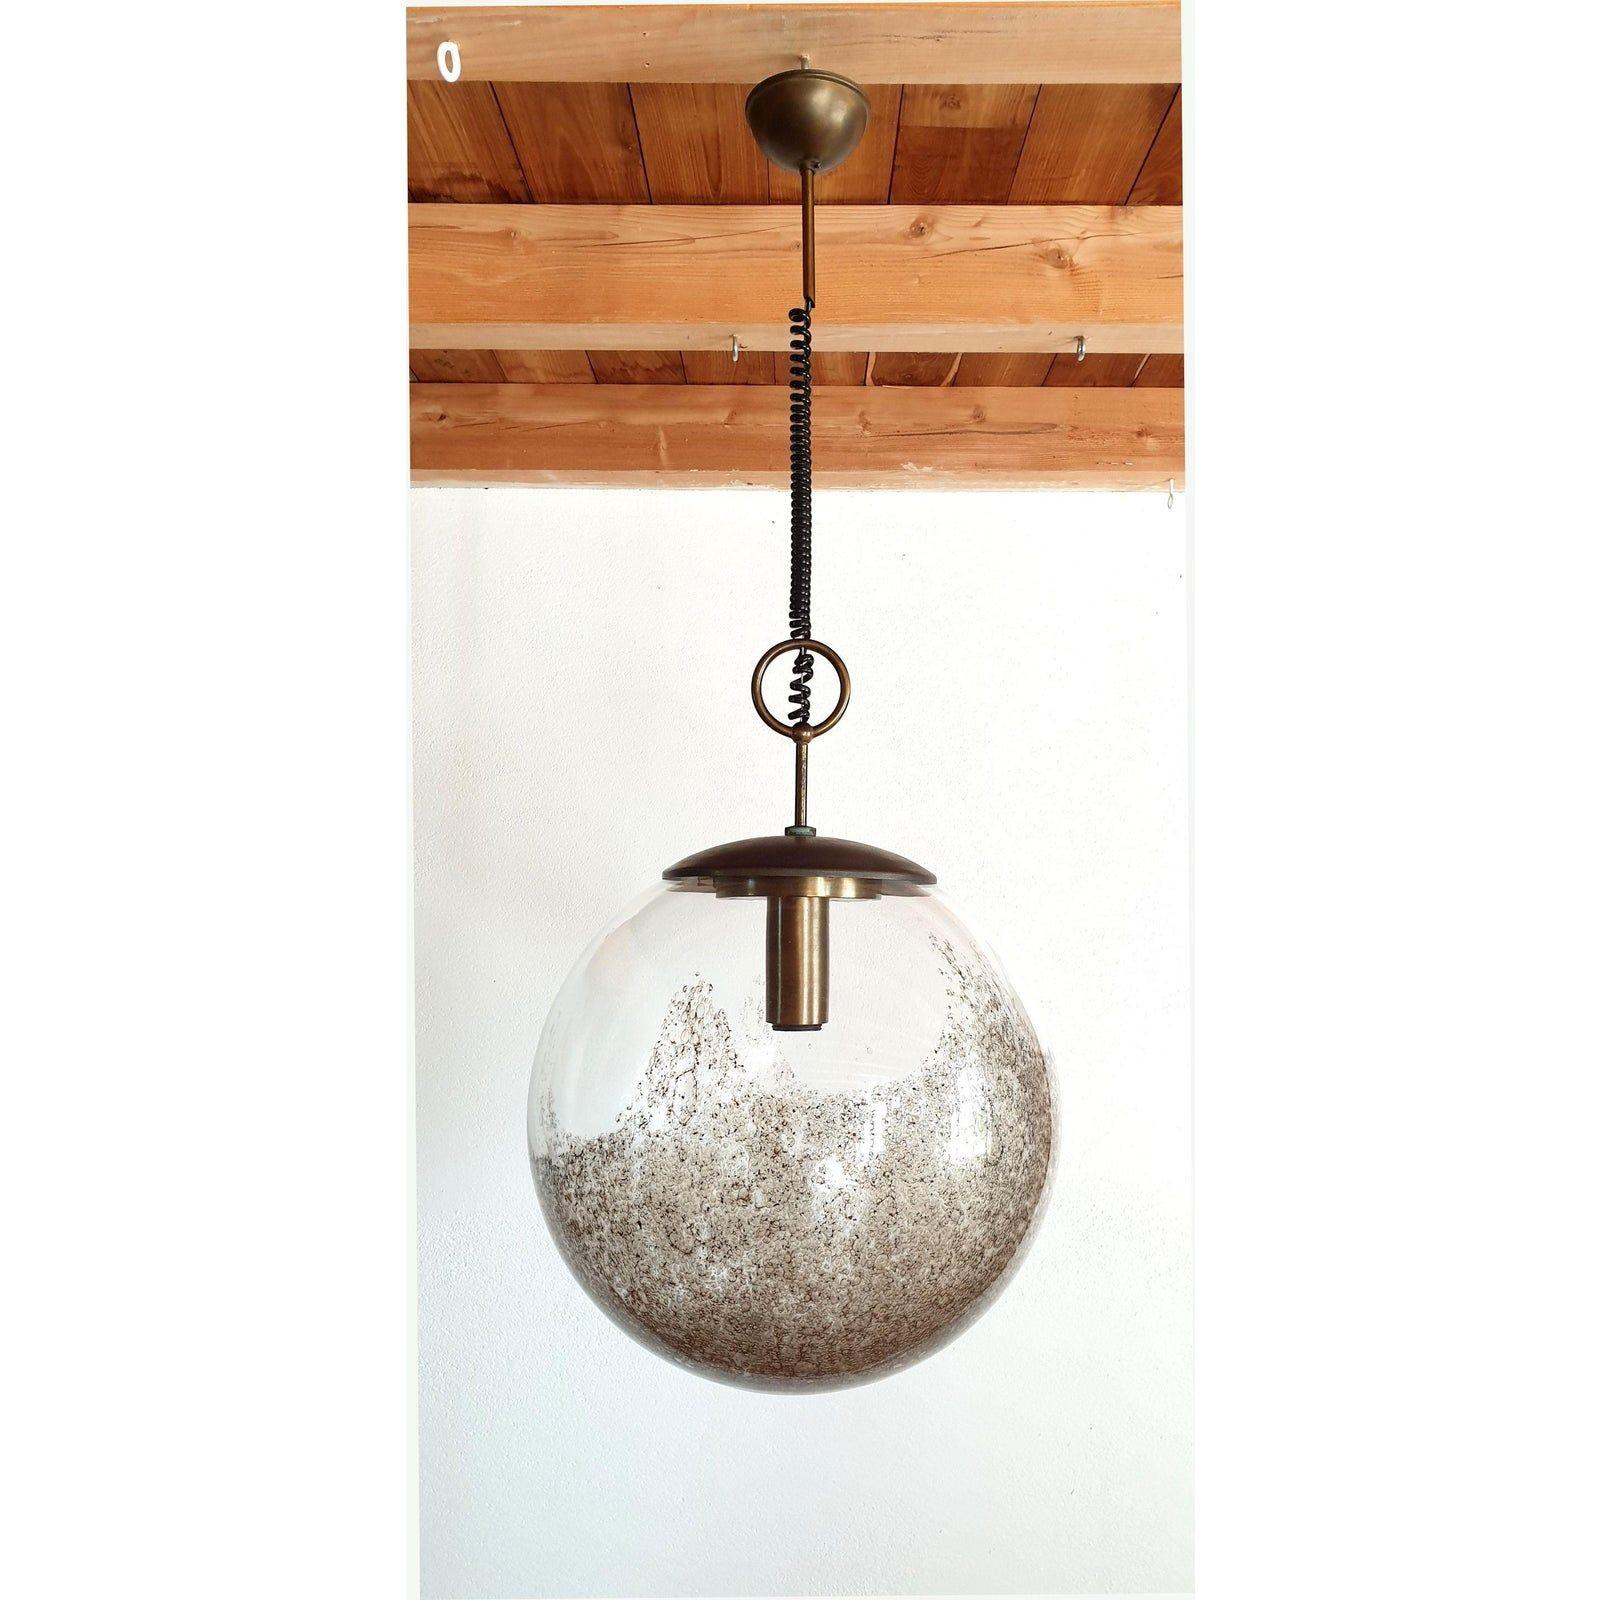 Large Murano glass globe pendant light, by Carlo Nason for Mazzega, Murano, Italy, 1960s.
The Mid Century Modern pendant is made of a Murano glass transparent globe, with a brown irregular decor,
inside the ball, that creates a translucent effect